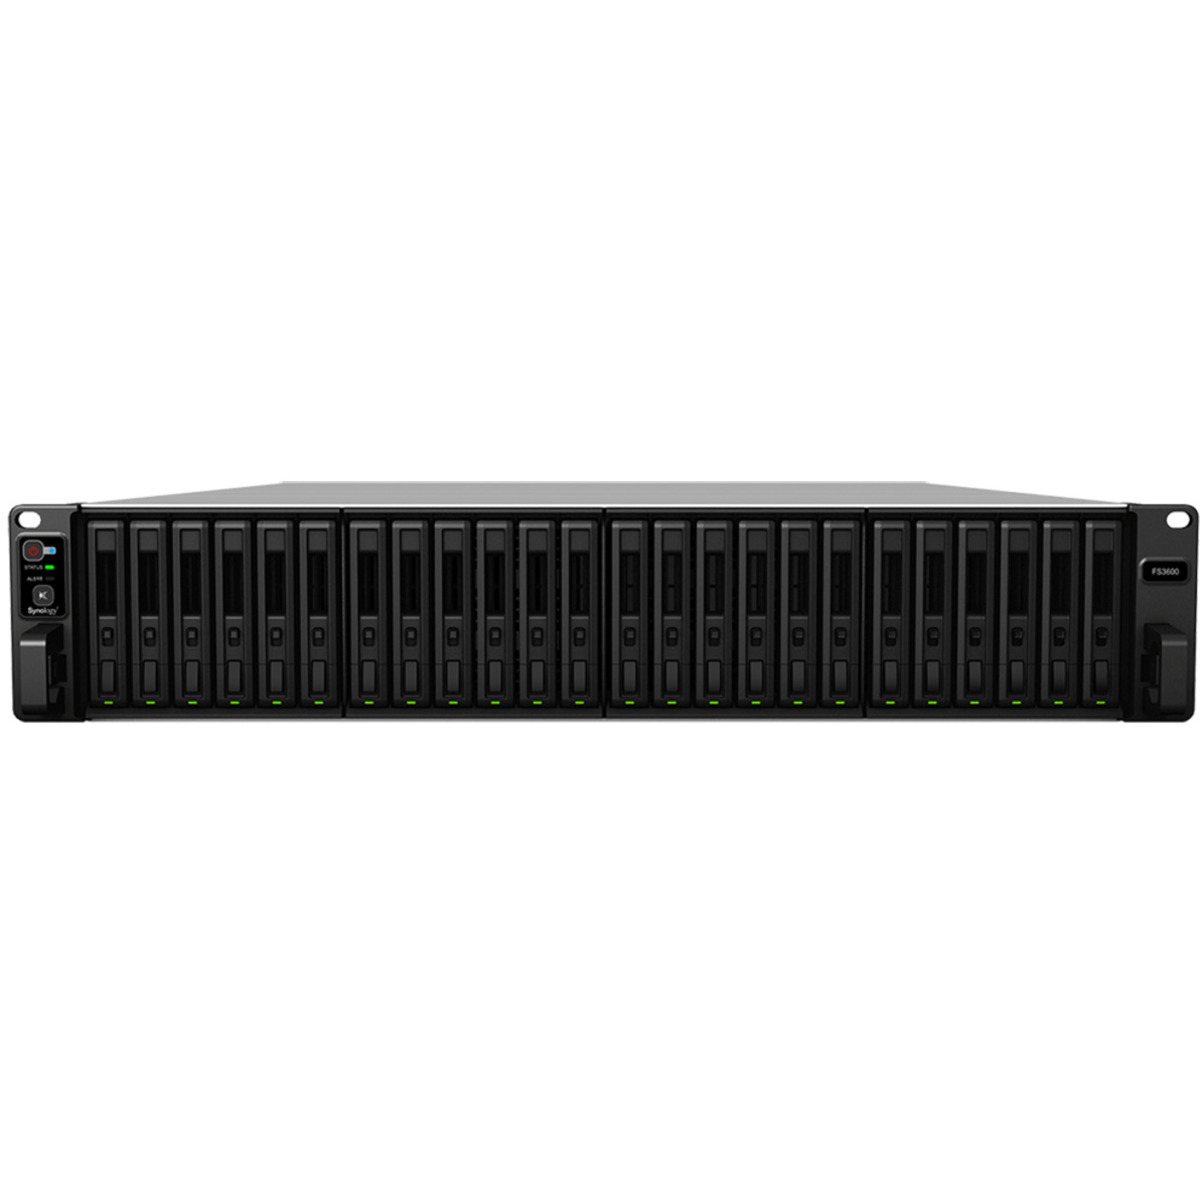 Synology FlashStation FS3600 9tb 24-Bay RackMount Large Business / Enterprise NAS - Network Attached Storage Device 18x500gb Western Digital Red SA500 WDS500G1R0A 2.5 560/530MB/s SATA 6Gb/s SSD NAS Class Drives Installed - Burn-In Tested - FREE RAM UPGRADE FlashStation FS3600